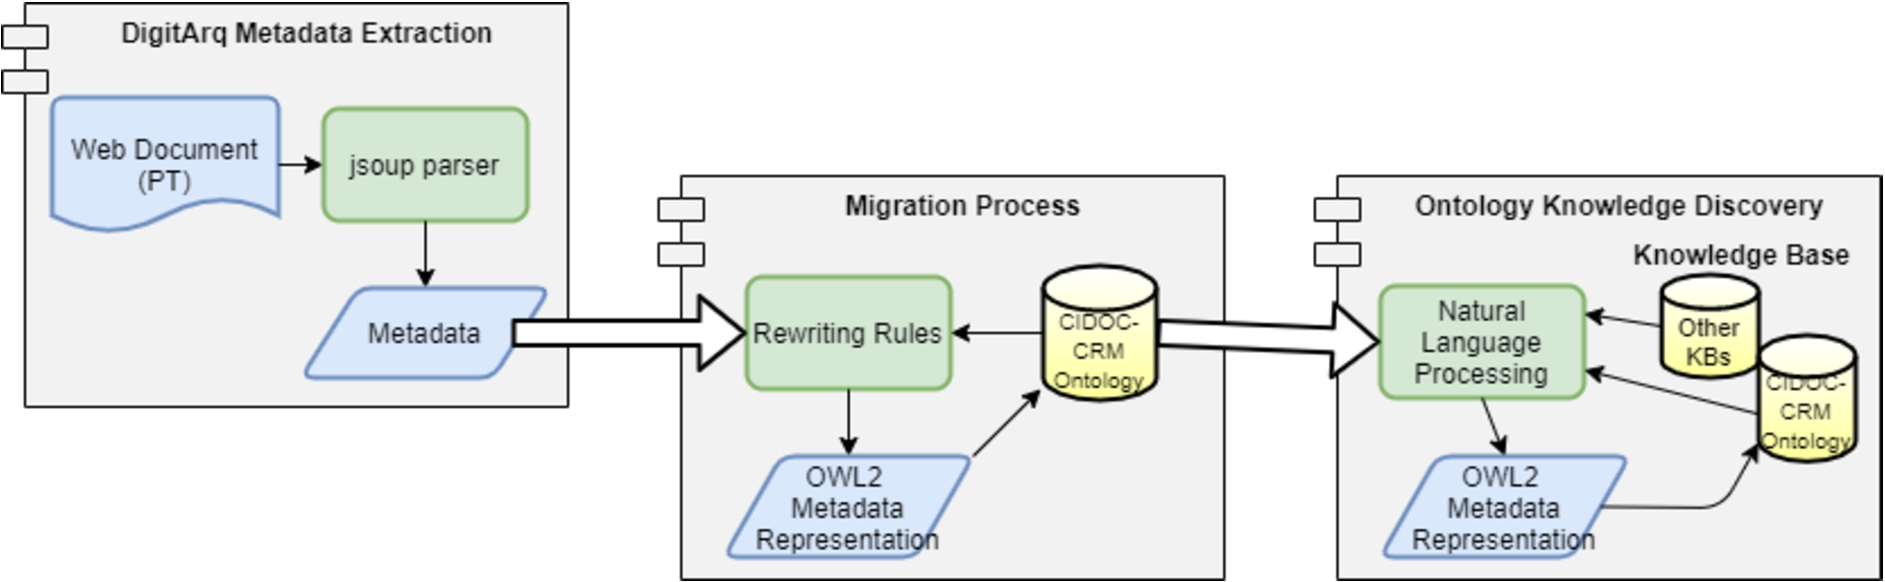 Architecture for automatic migration of ISAD(G) units into CIDOC-CRM.